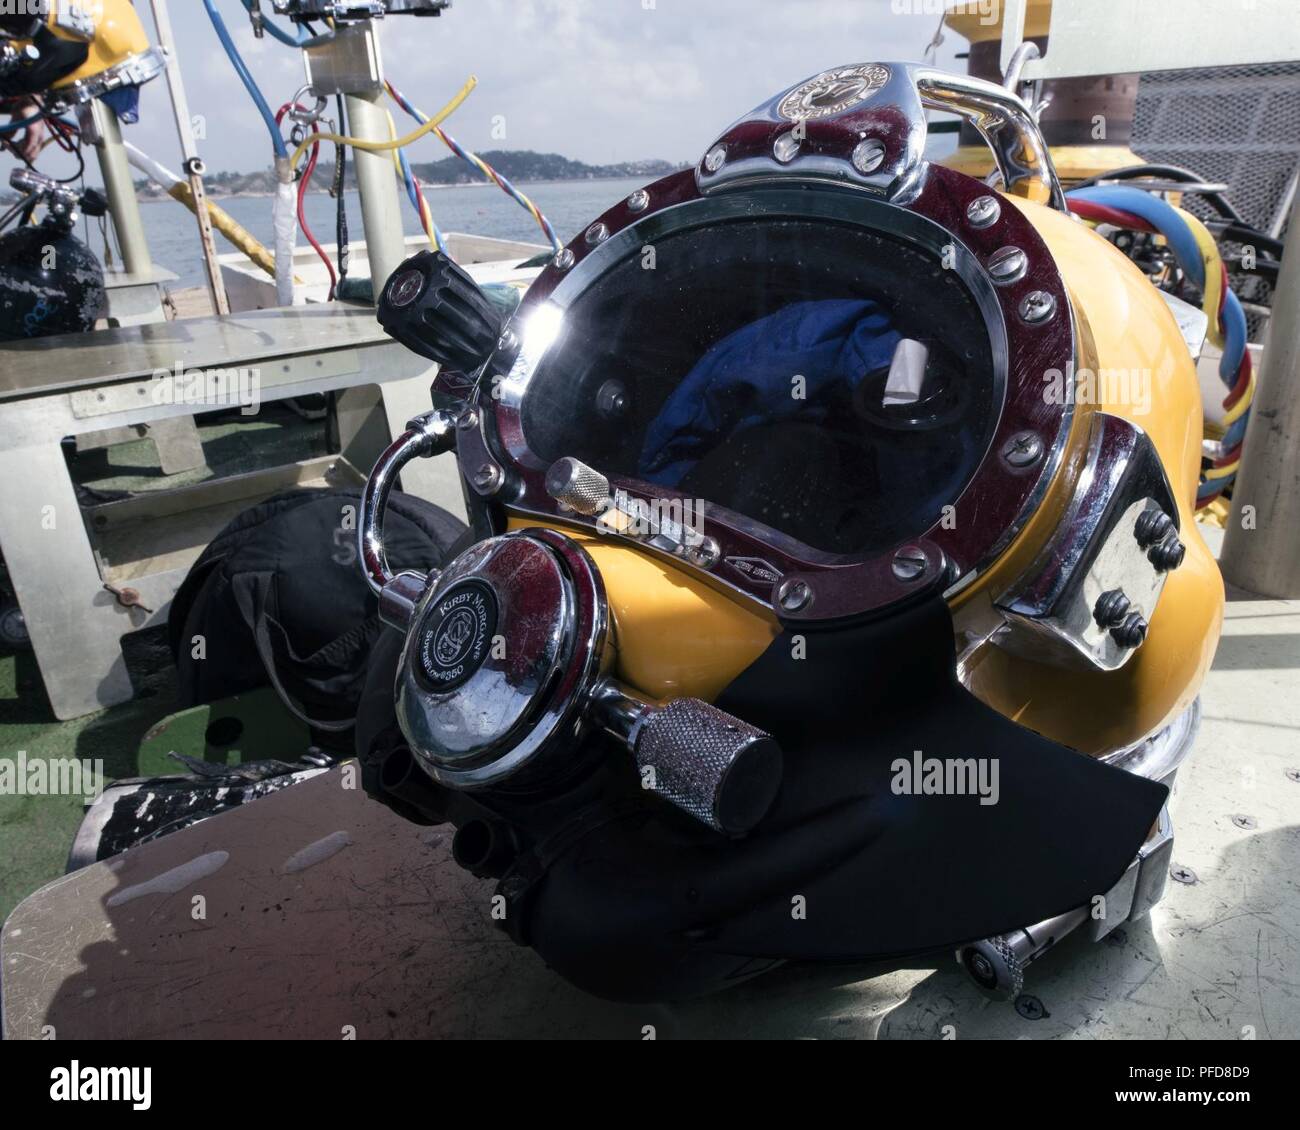 A KM-37 dive helmet sits on a dive bench during underwater recovery operations conducted by the Defense POWMIA Accounting Agency (DPAA) off the coast of Hoang Mai, Vietnam, June 2, 2018. The Defense POW/MIA Accounting Agency conducts global search, recovery and laboratory operations to provide the fullest possible accounting for our missing personnel to their families and the nation. Stock Photo